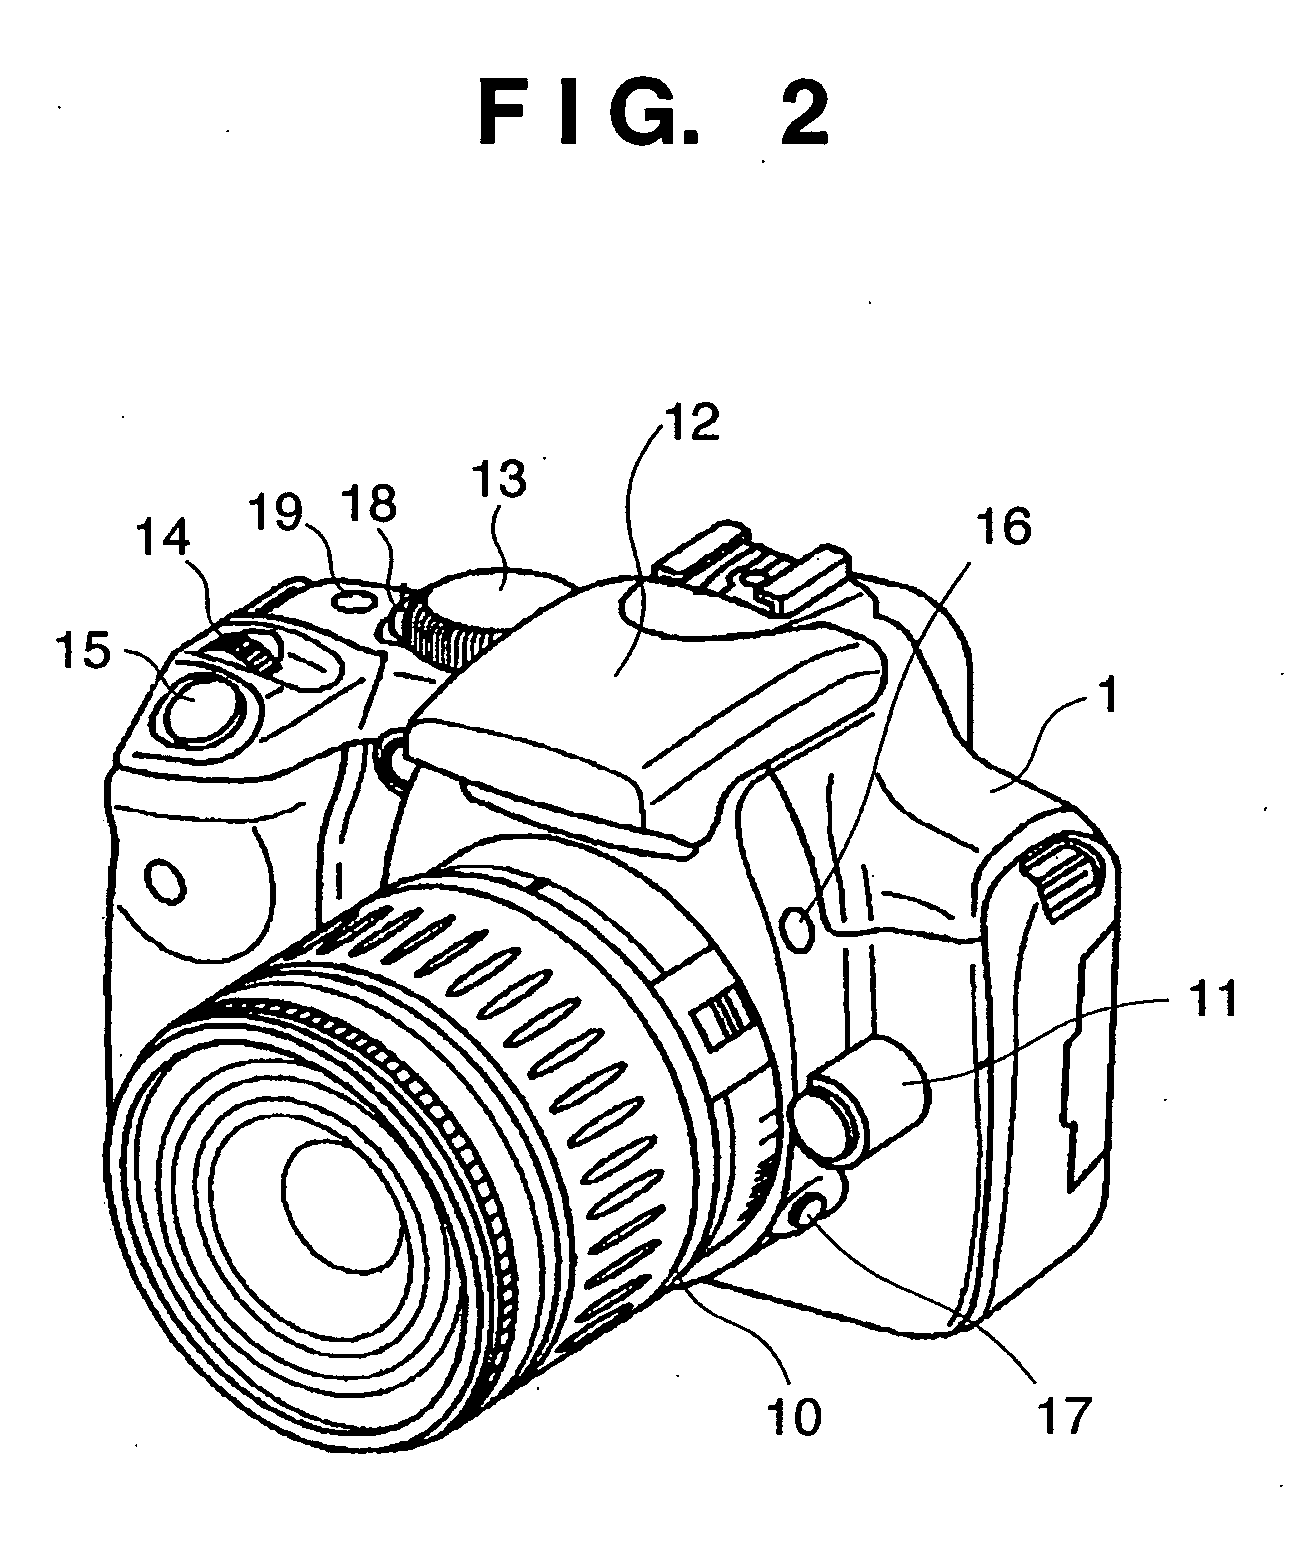 Electronic device capable of displaying an instruction manual